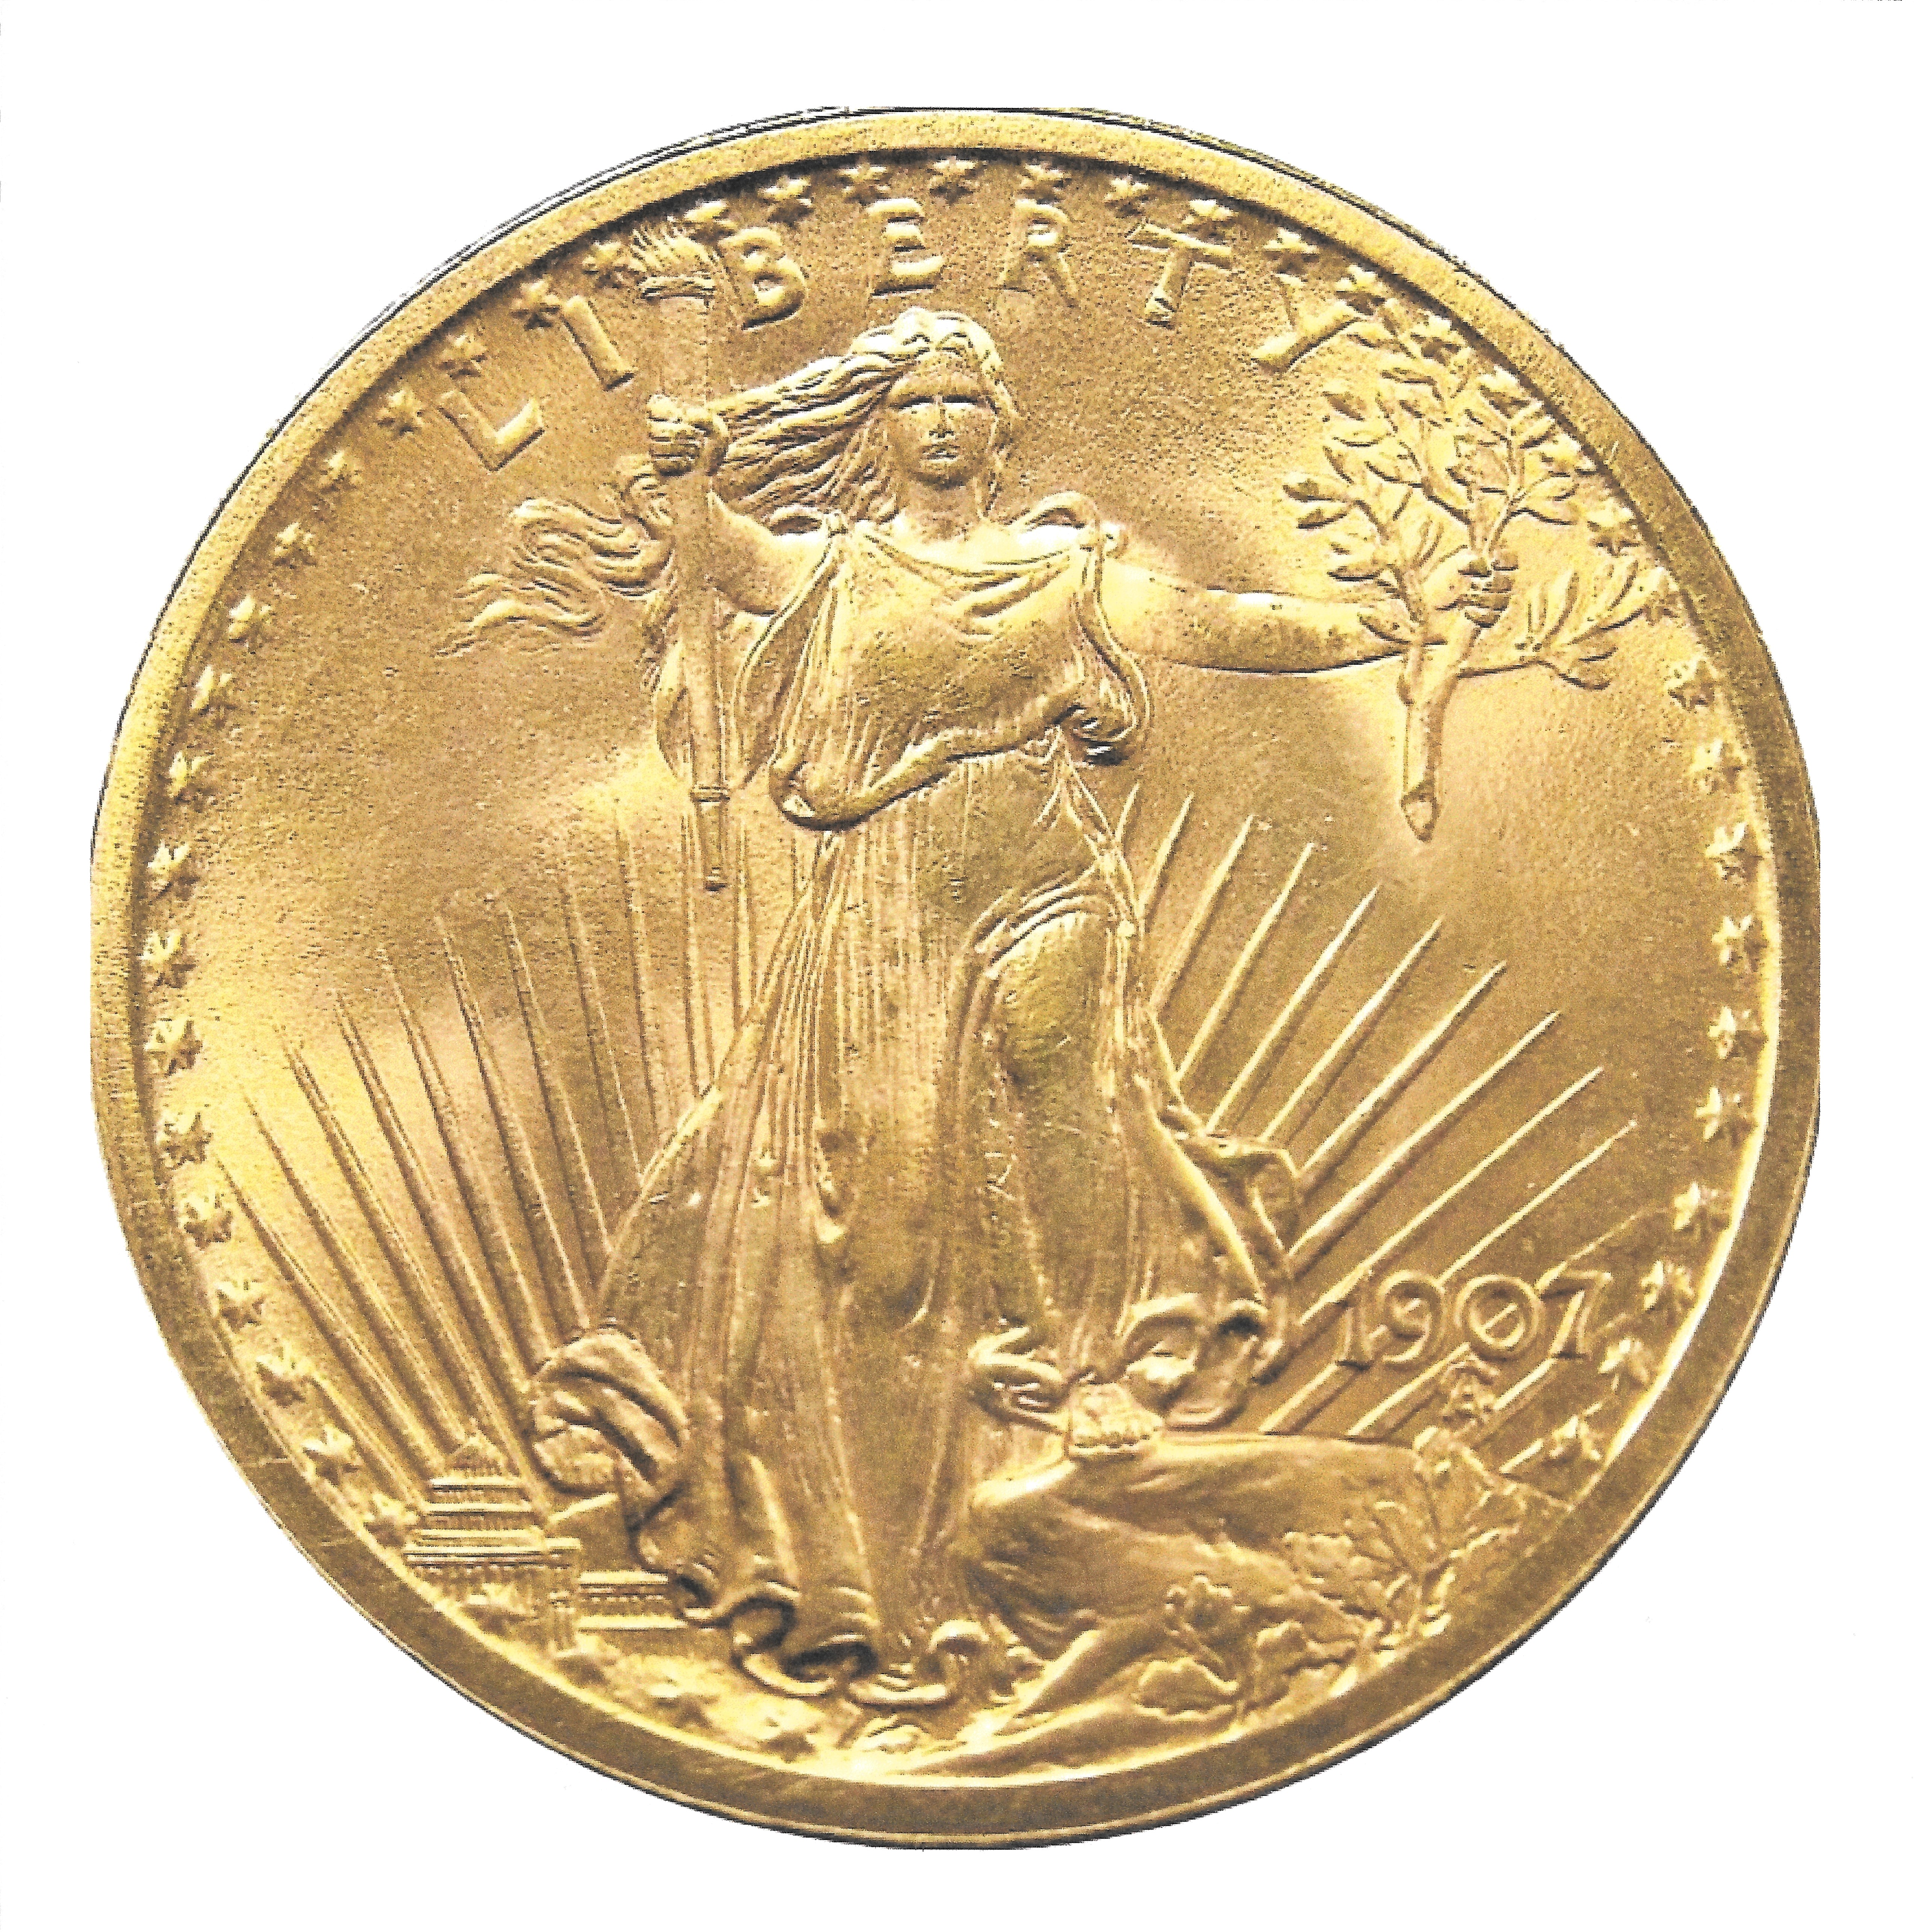 Image of the $20 gold coin for which Ms. Anderson served as the model